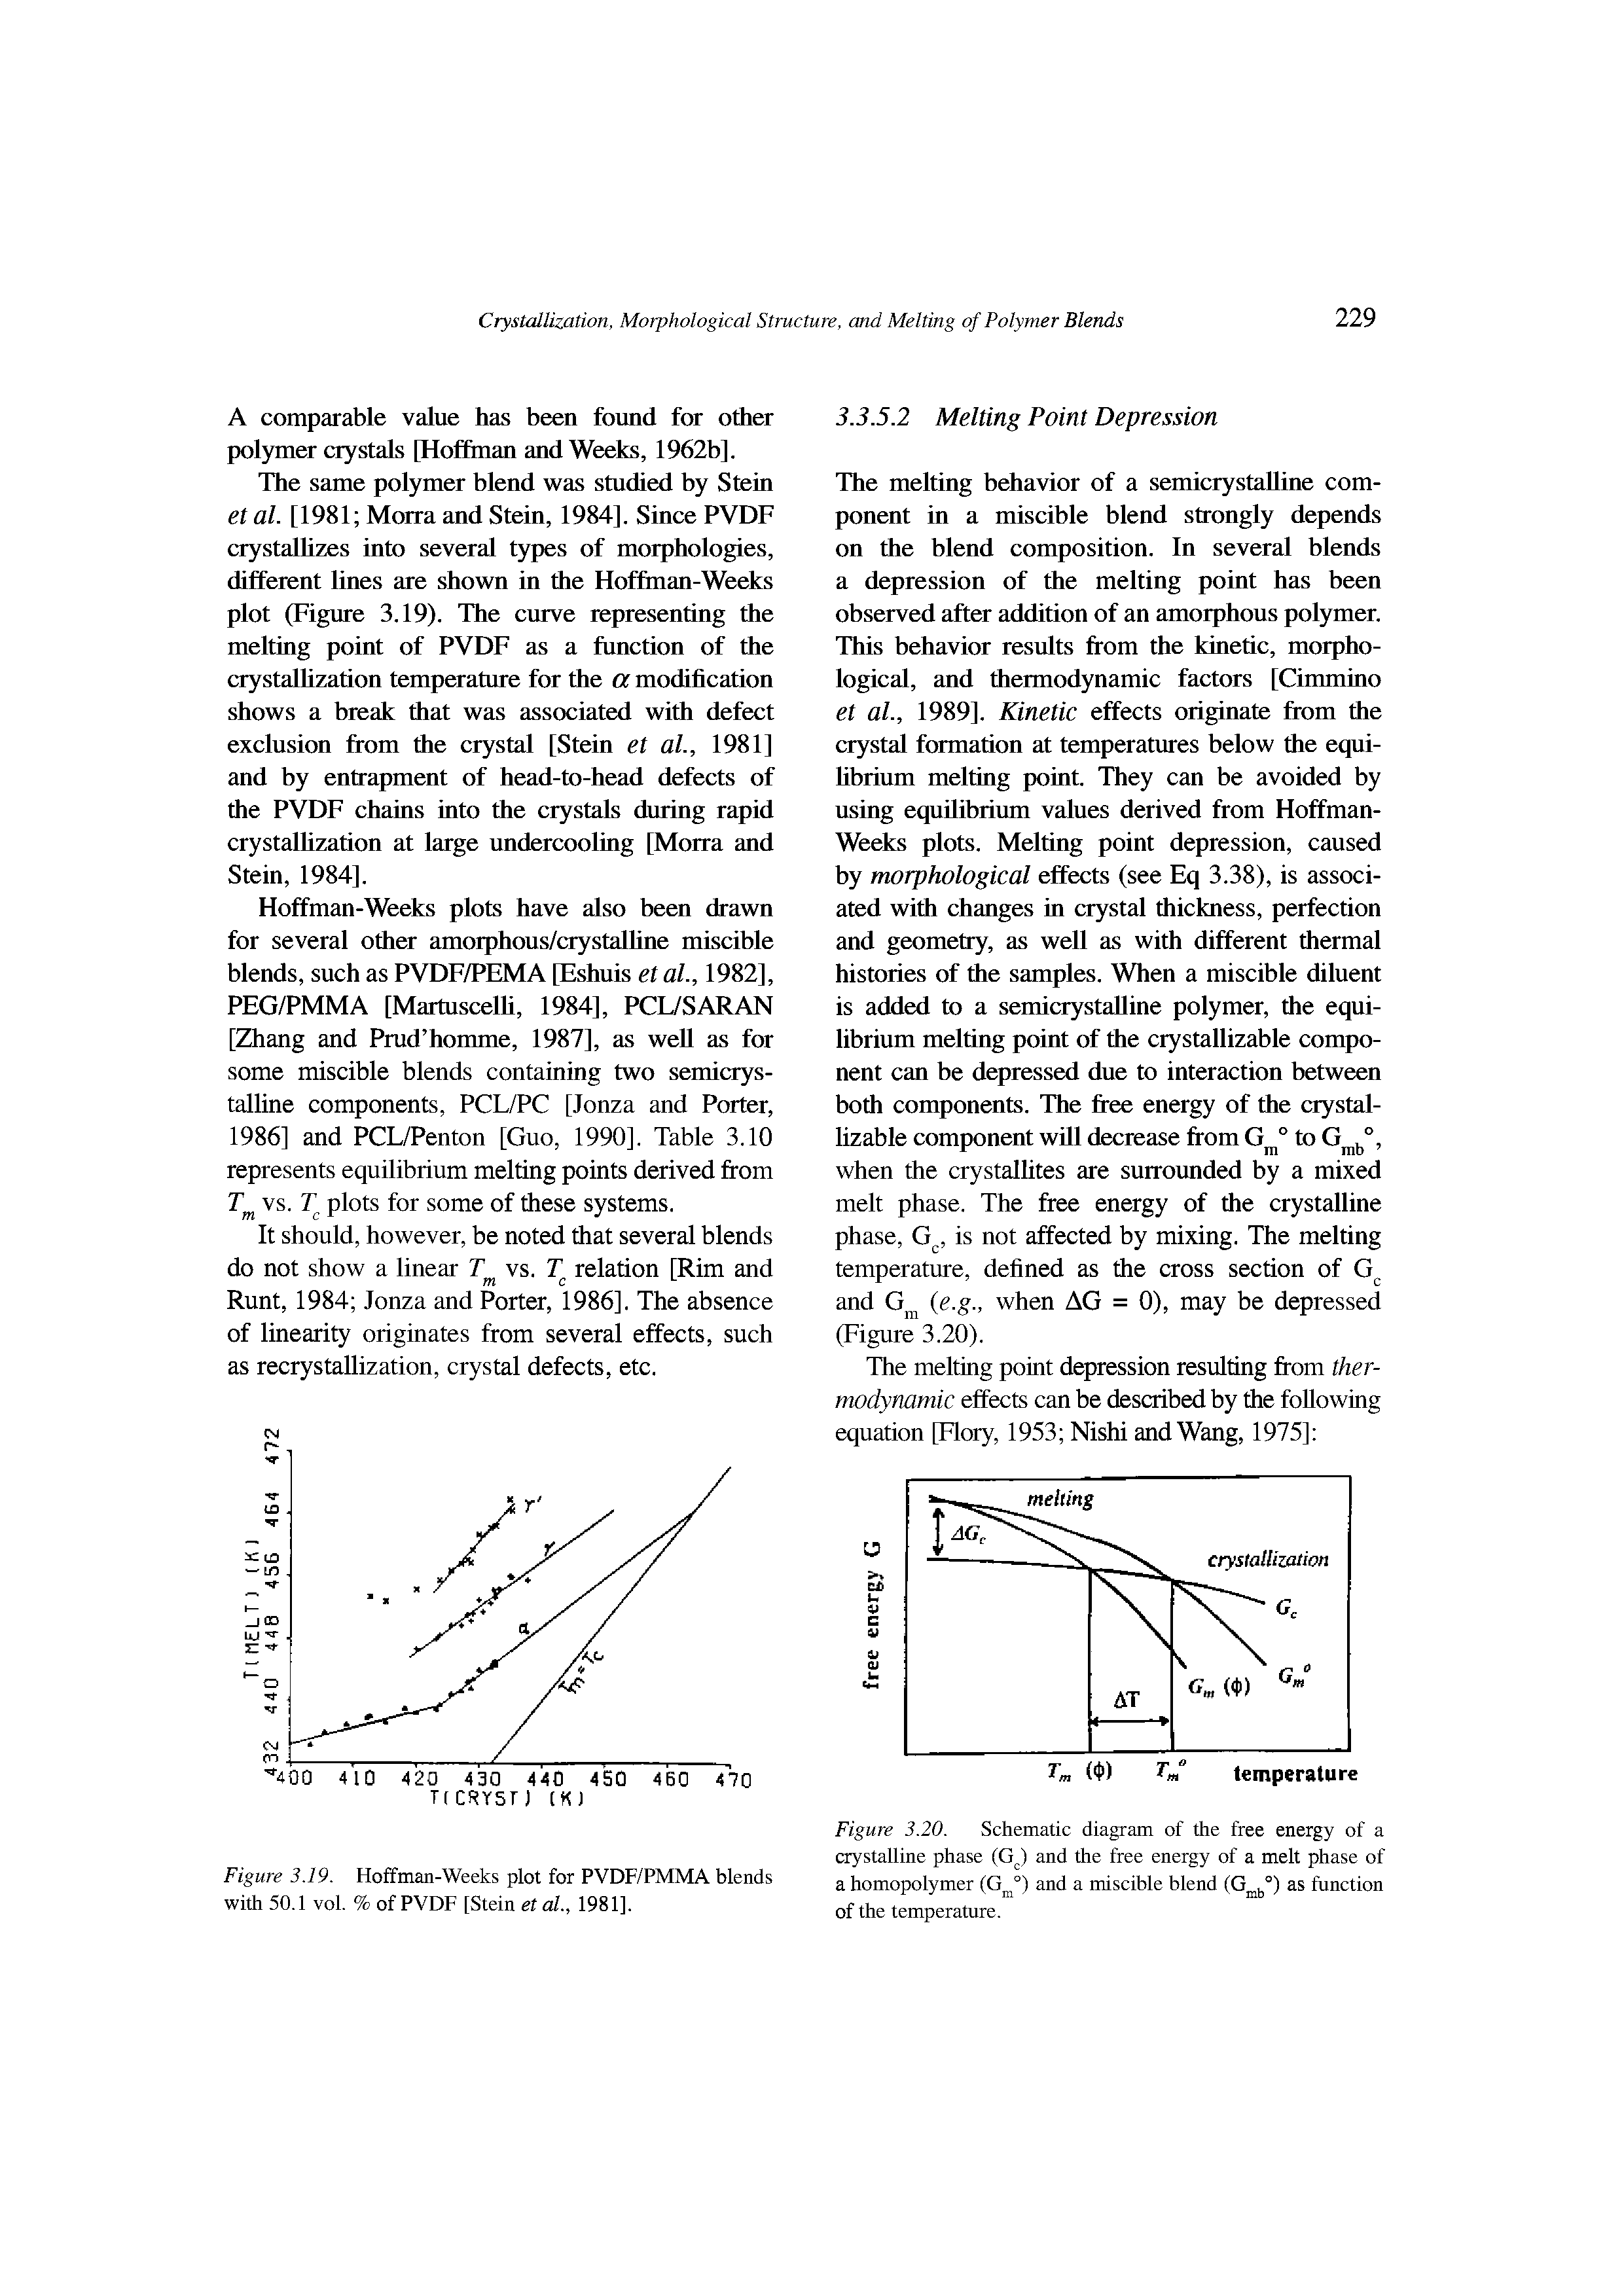 Figure 3.20. Schematic diagram of the free energy of a crystalline phase (G ) and the free energy of a melt phase of a homopolymer (G ) and a miscible blend as function...